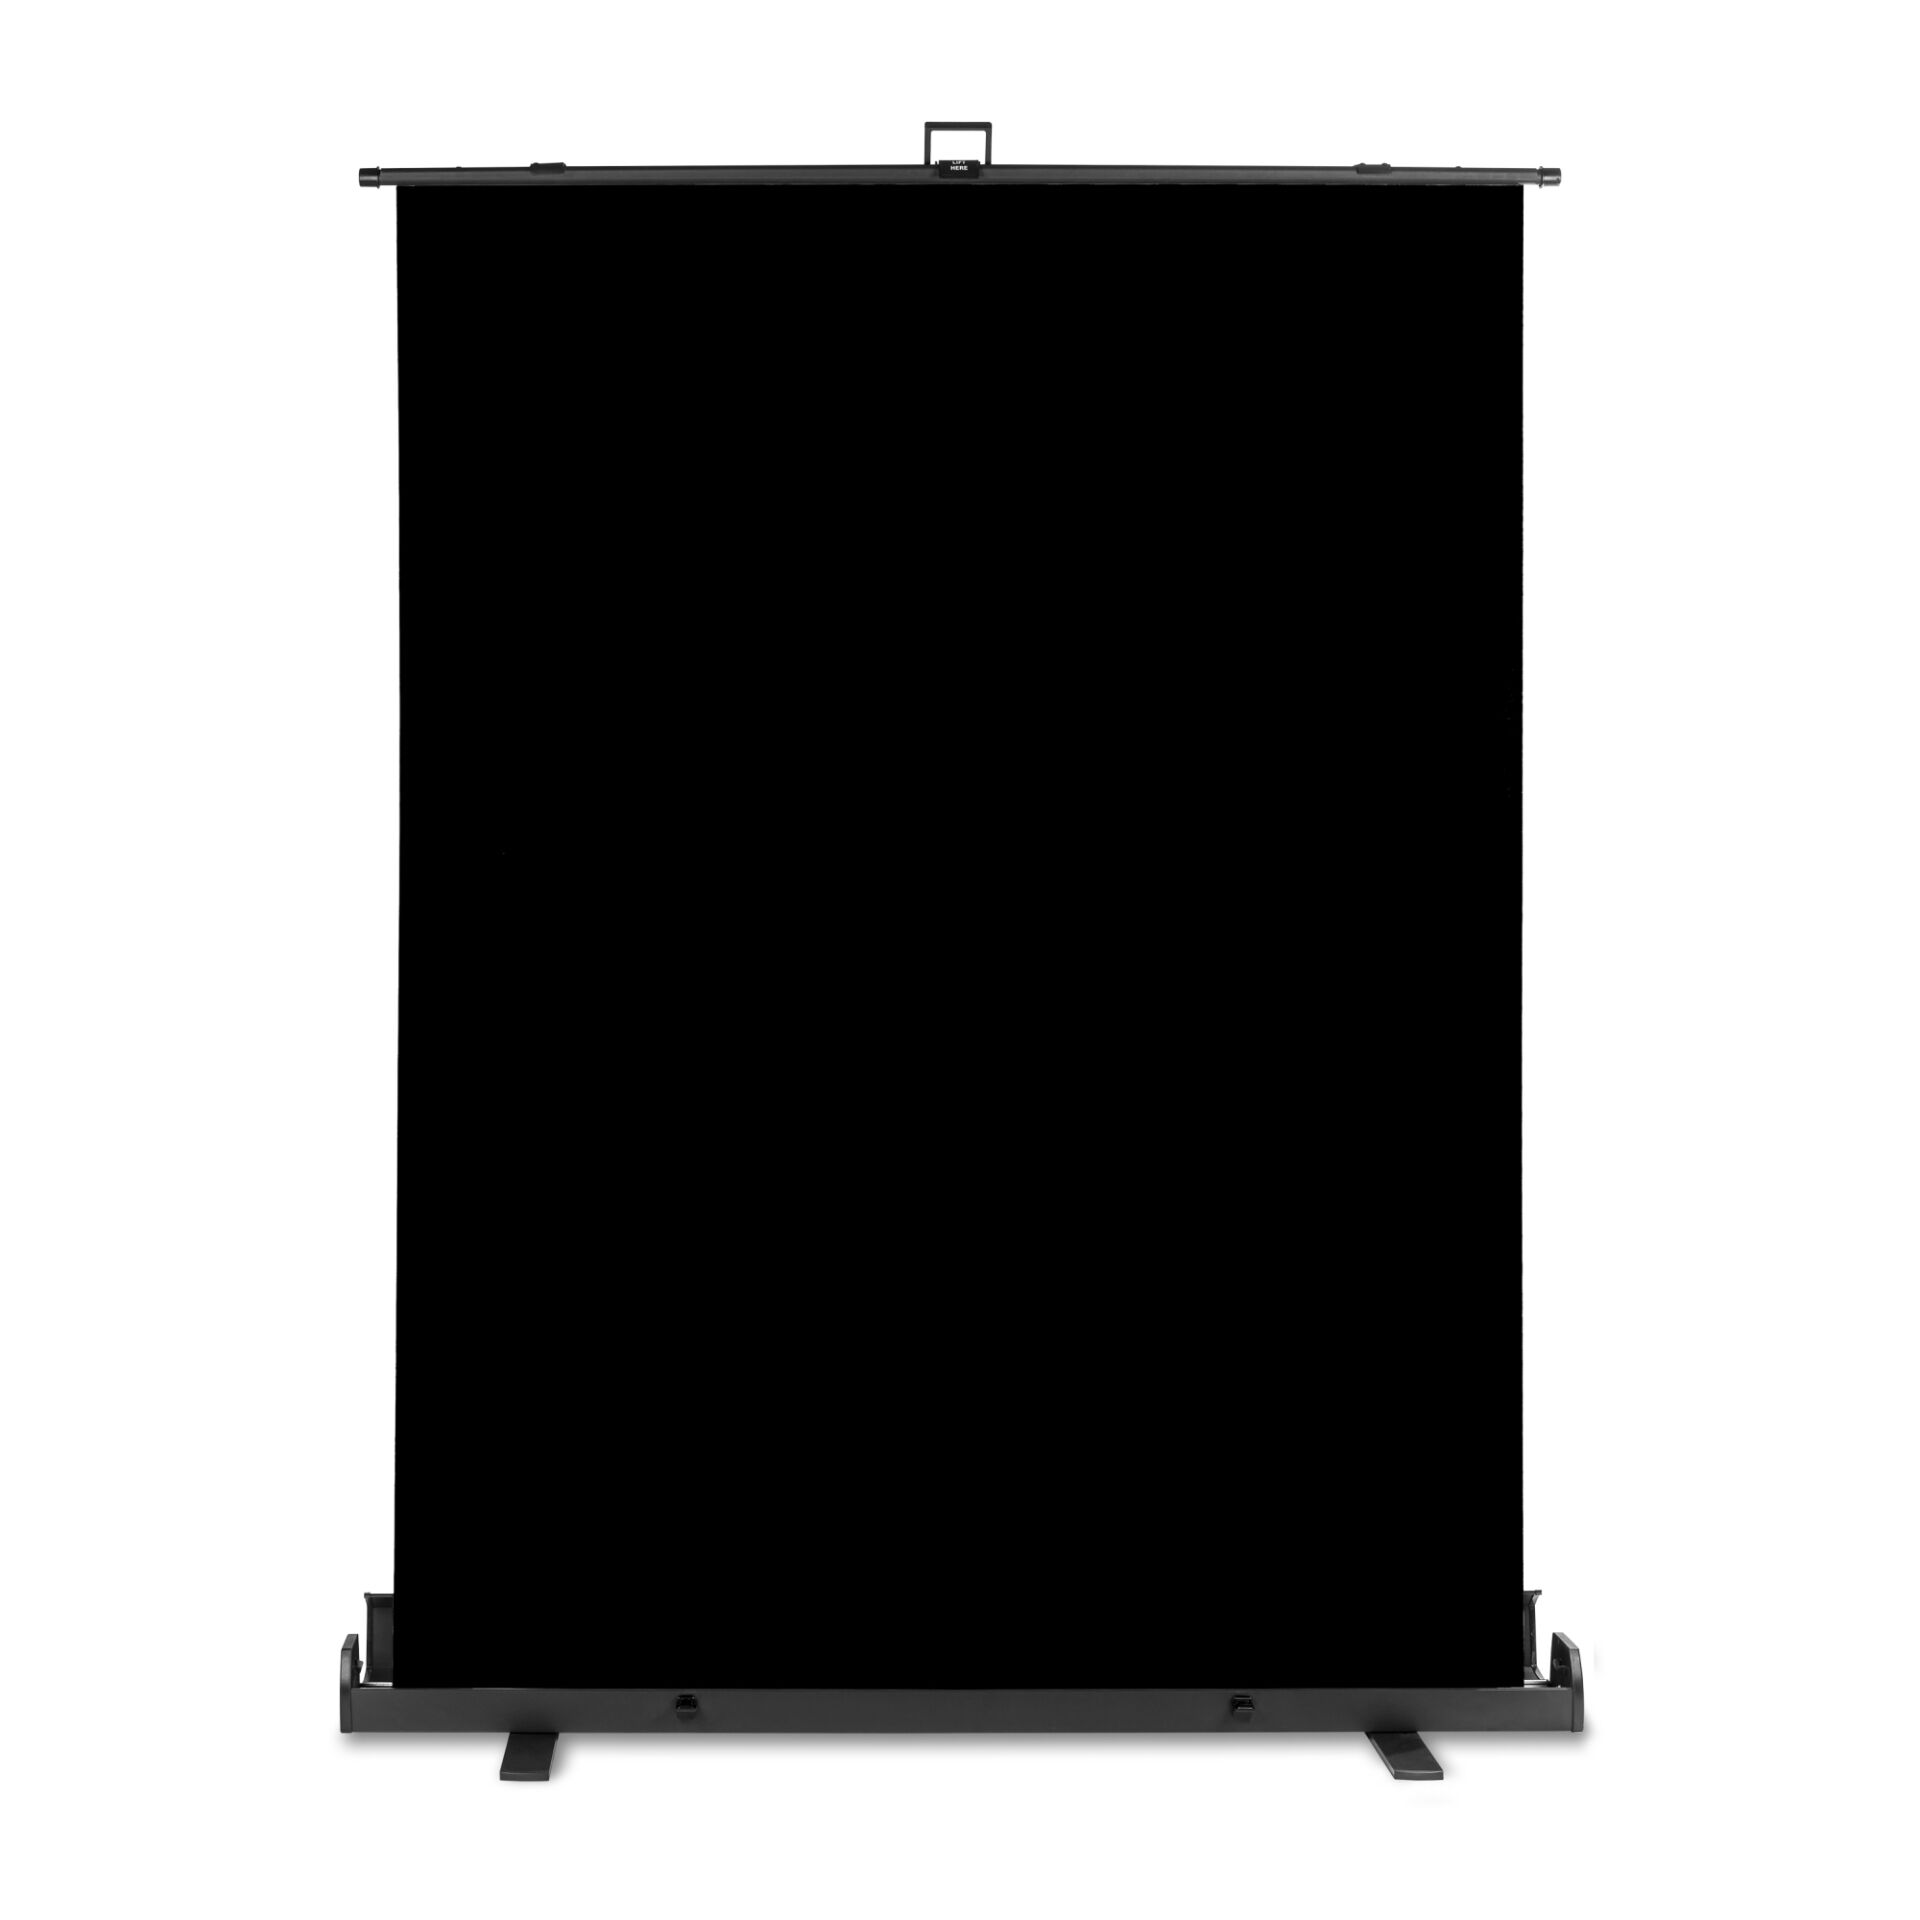 Walimex pro Roll-up Panel Background 155x200cm black